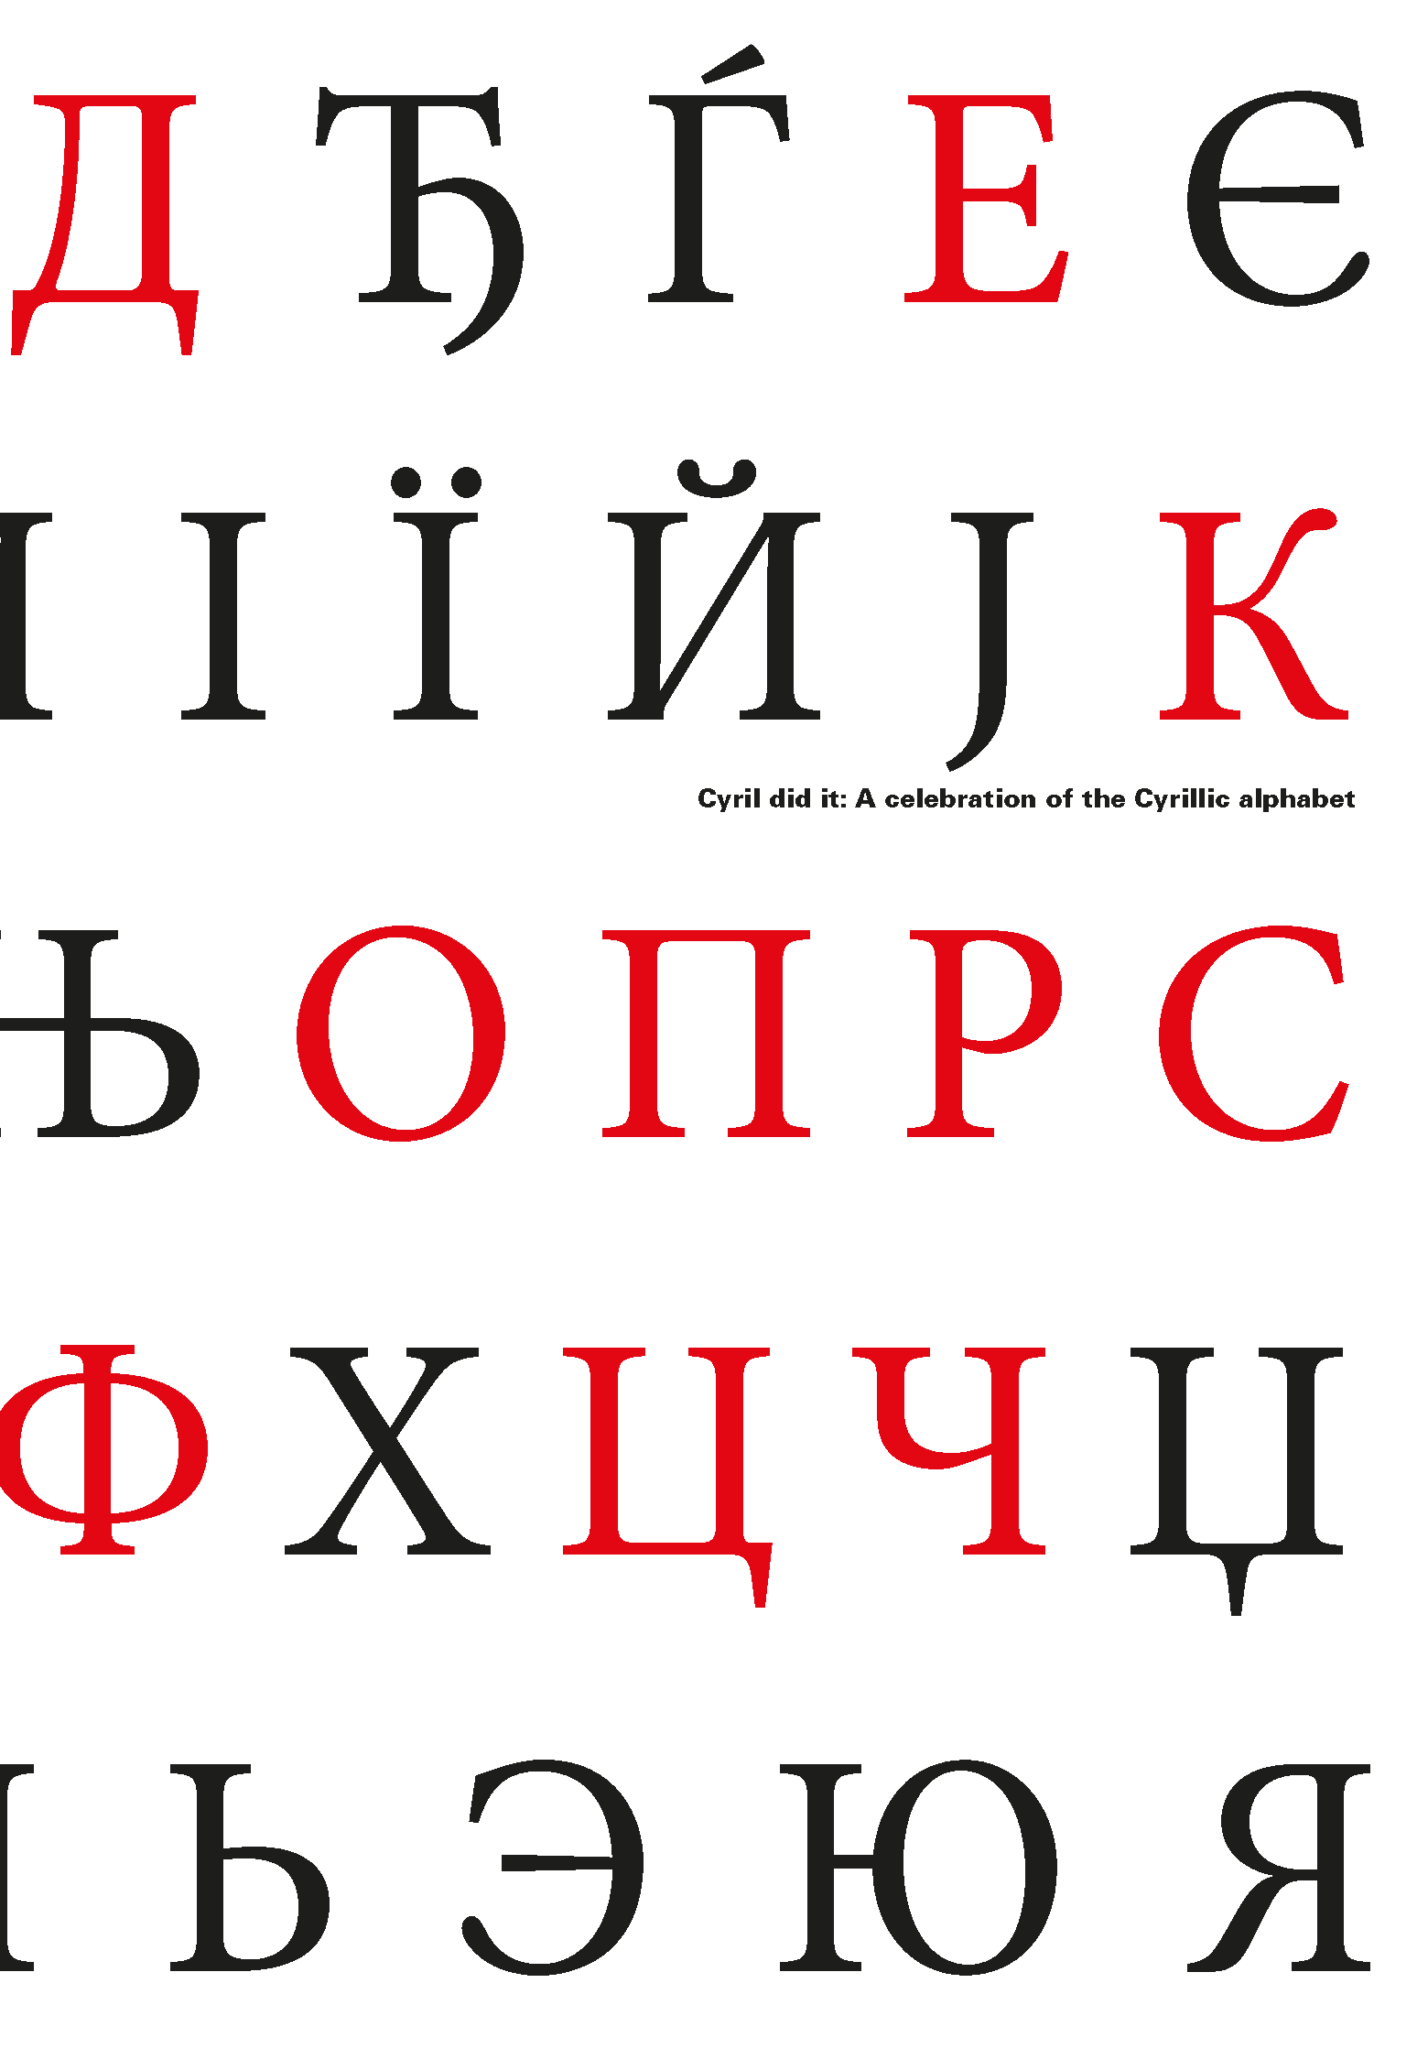 cyril-did-it-a-celebration-of-the-cyrillic-alphabet-localfonts